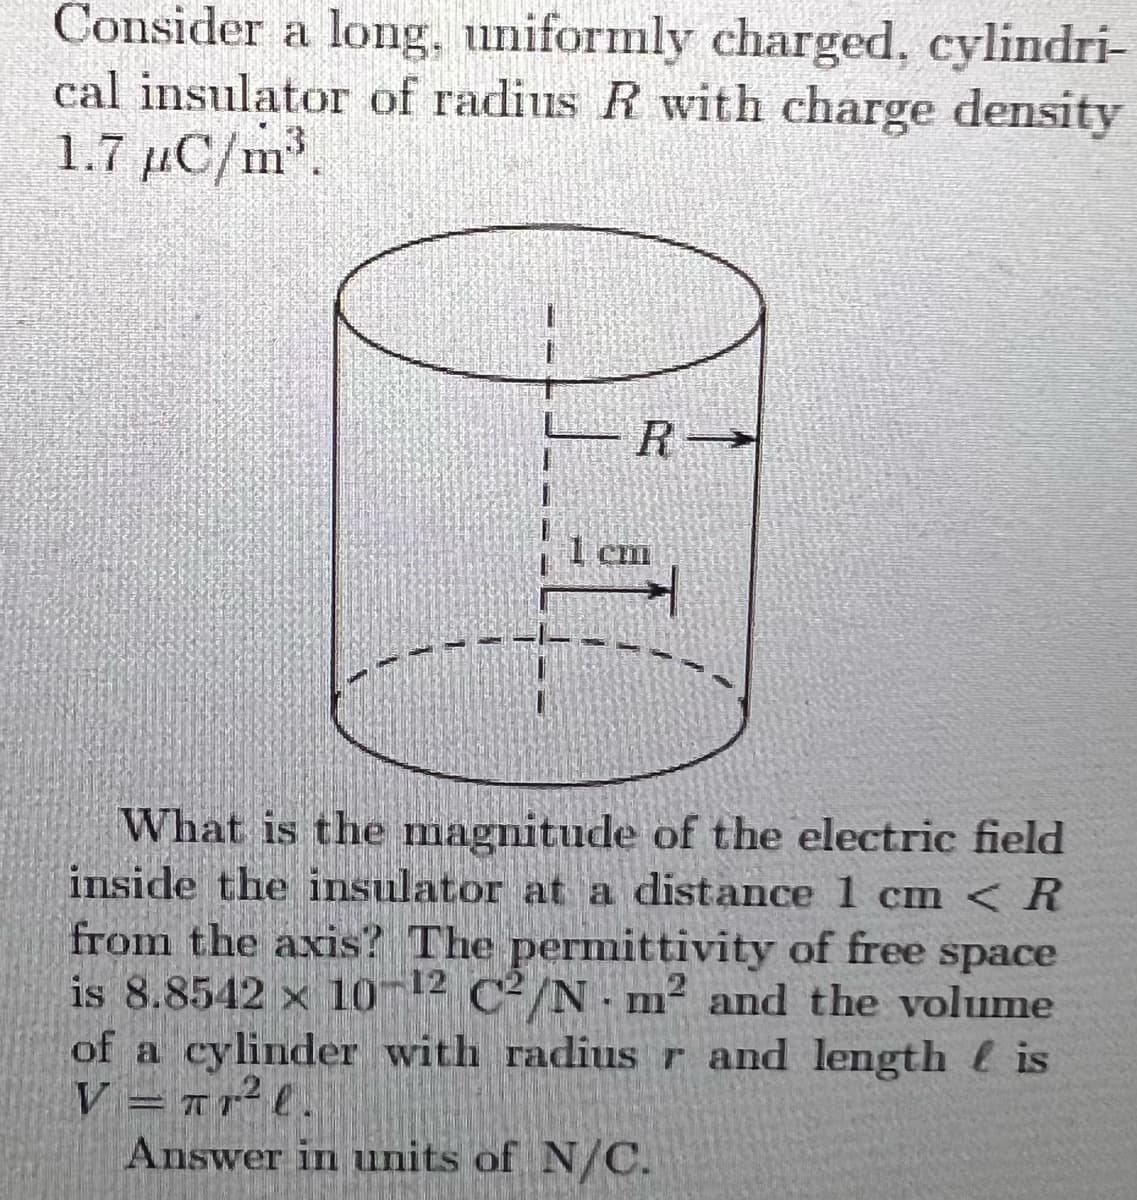 Consider a long, uniformly charged, cylindri-
cal insulator of radius R with charge density
1.7 µC/m.
1 Cl
What is the magnitude of the electric field
inside the insulator at a distance 1 cm < R
from the axis? The permittivity of free
is 8.8542 x 10 12 C²/N-m² and the volume
of a cylinder with radius r and length is
V = 1r2l.
Answer in units of N/C.
space
